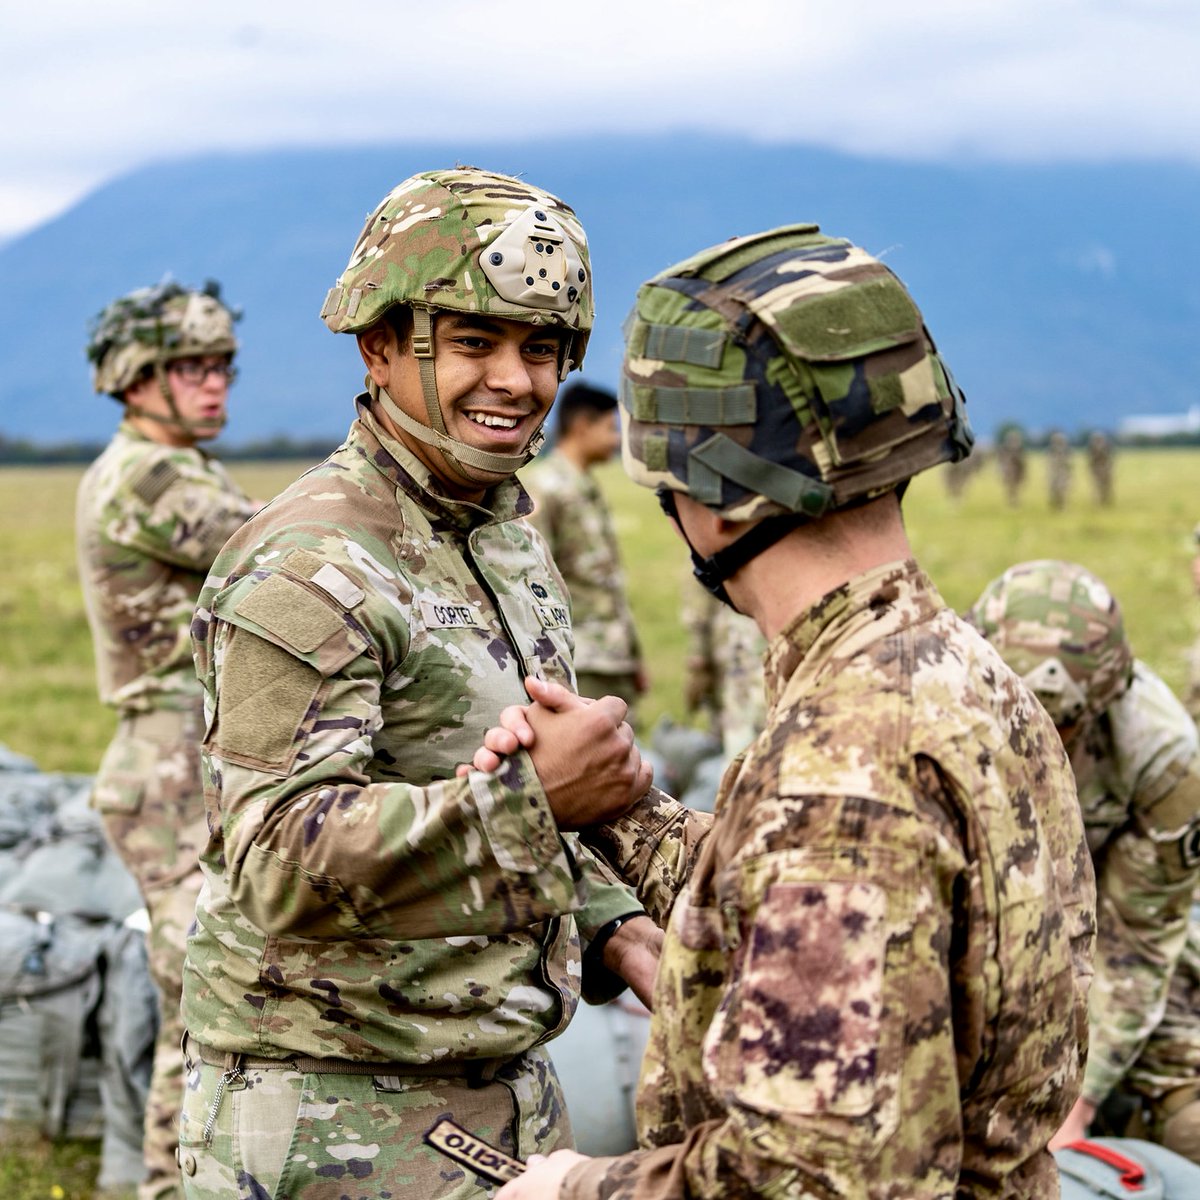 High in the sky 🪂

Allied paratroopers from 🇩🇪 🇮🇹 🇺🇸 performed several jumps over a drop zone in northern Italy.

NATO Allies train and exercise together on land, air and sea to test and maintain our readiness and ability to defend every inch of Allied territory